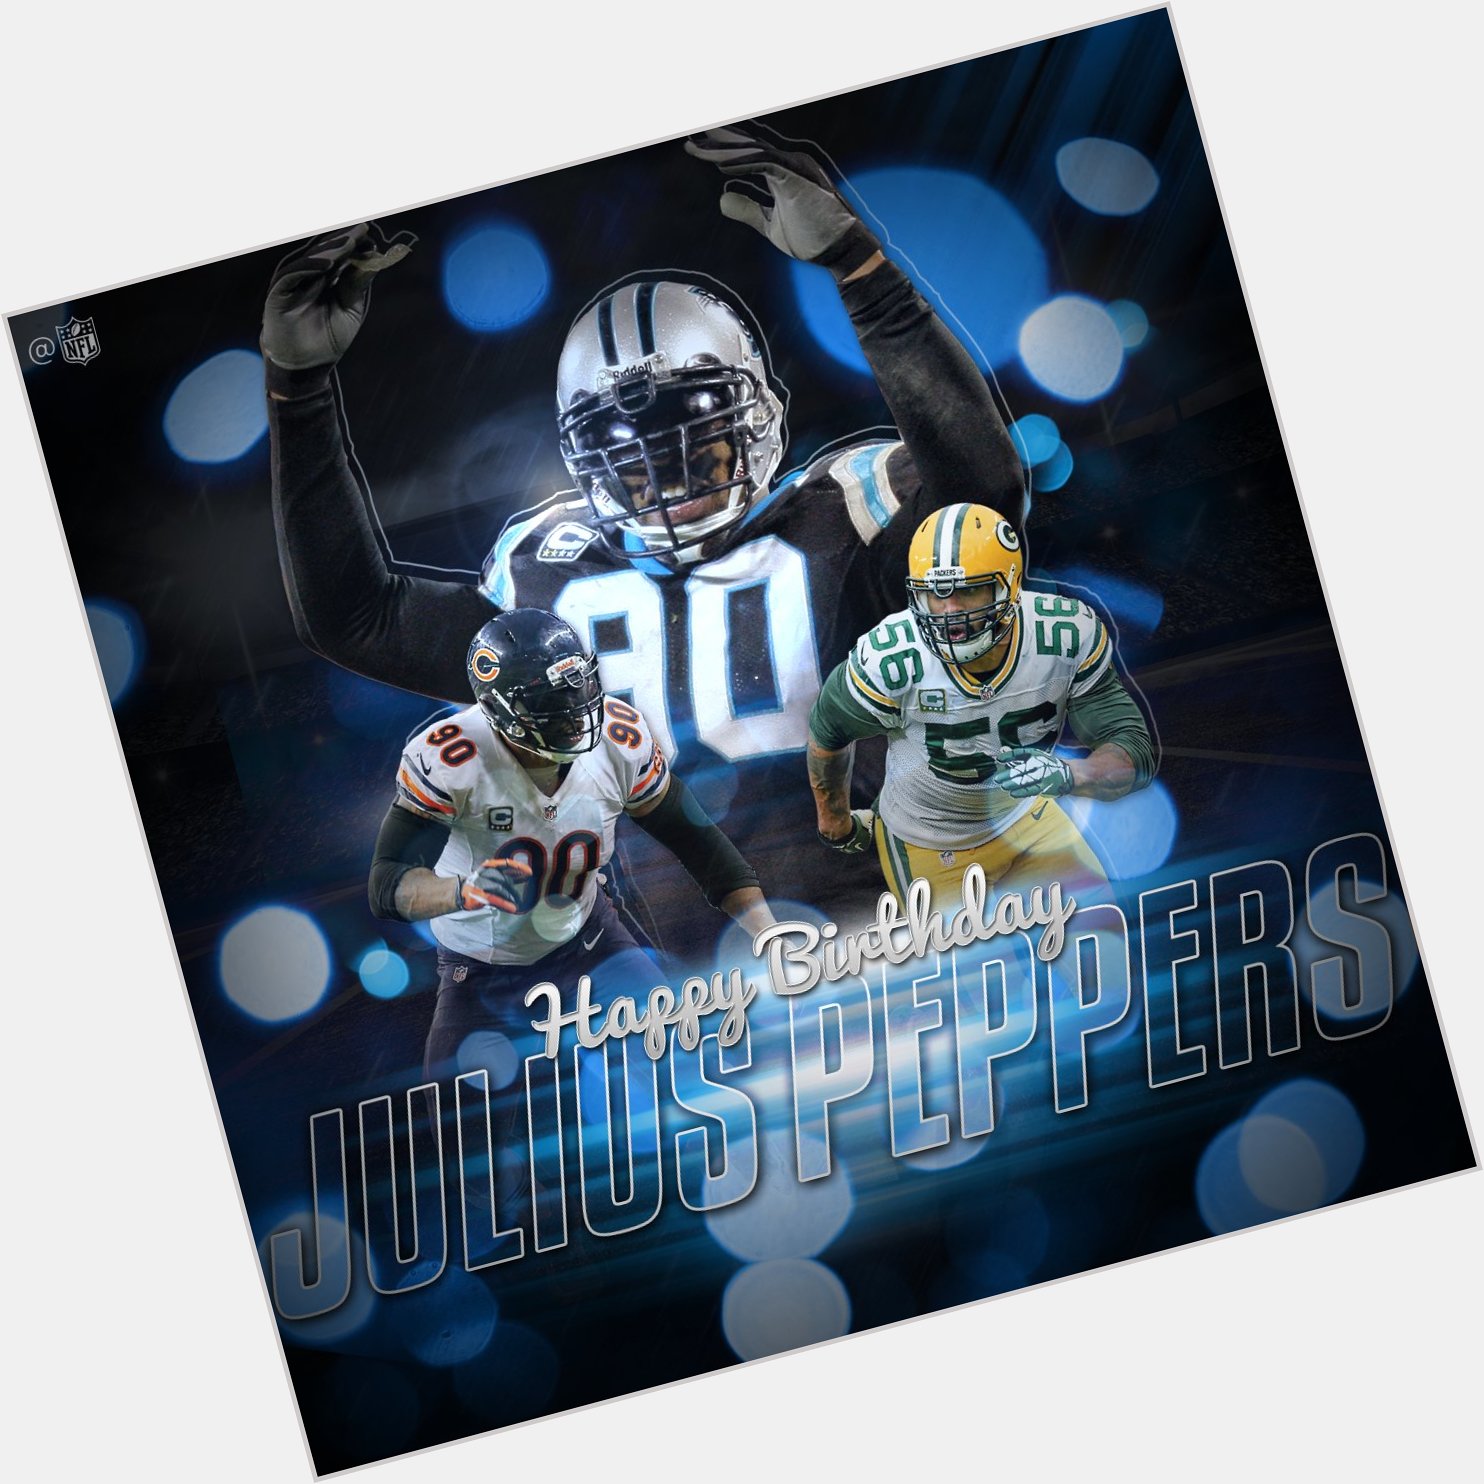 NFL: Join us in wishing Julius Peppers a Happy Birthday! 